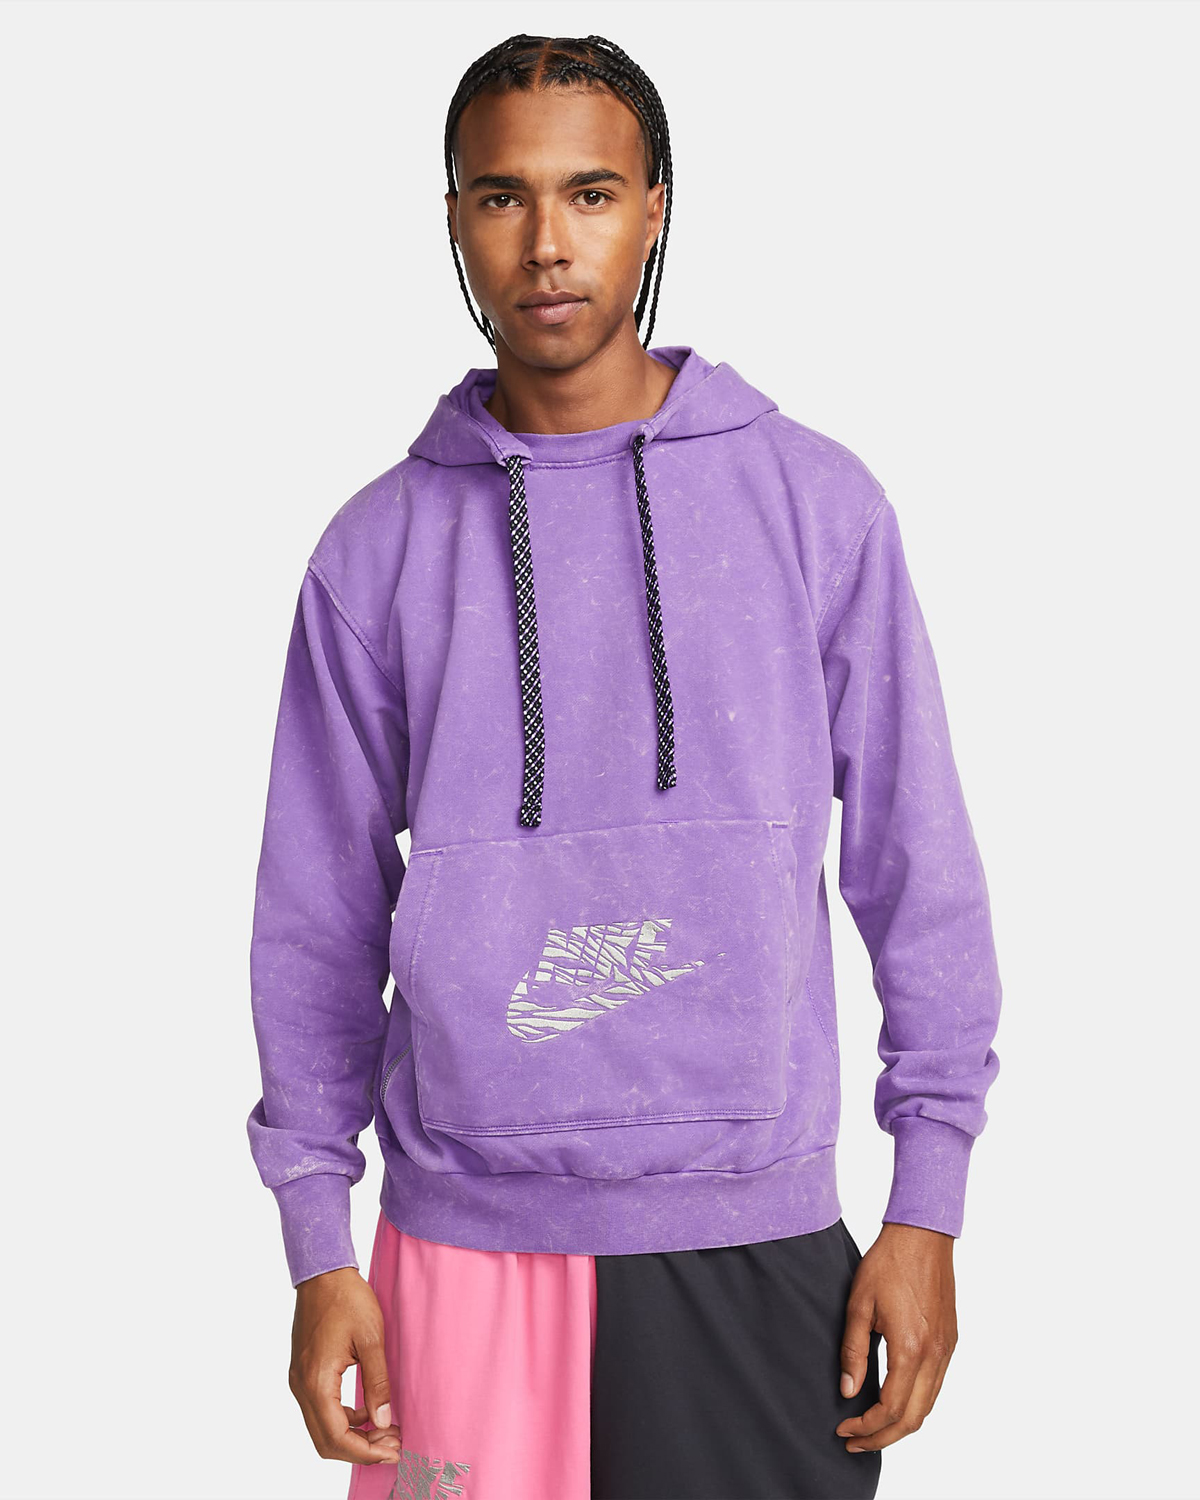 Nike-Standard-Issue-Basketball-Hoodie-Action-Grape